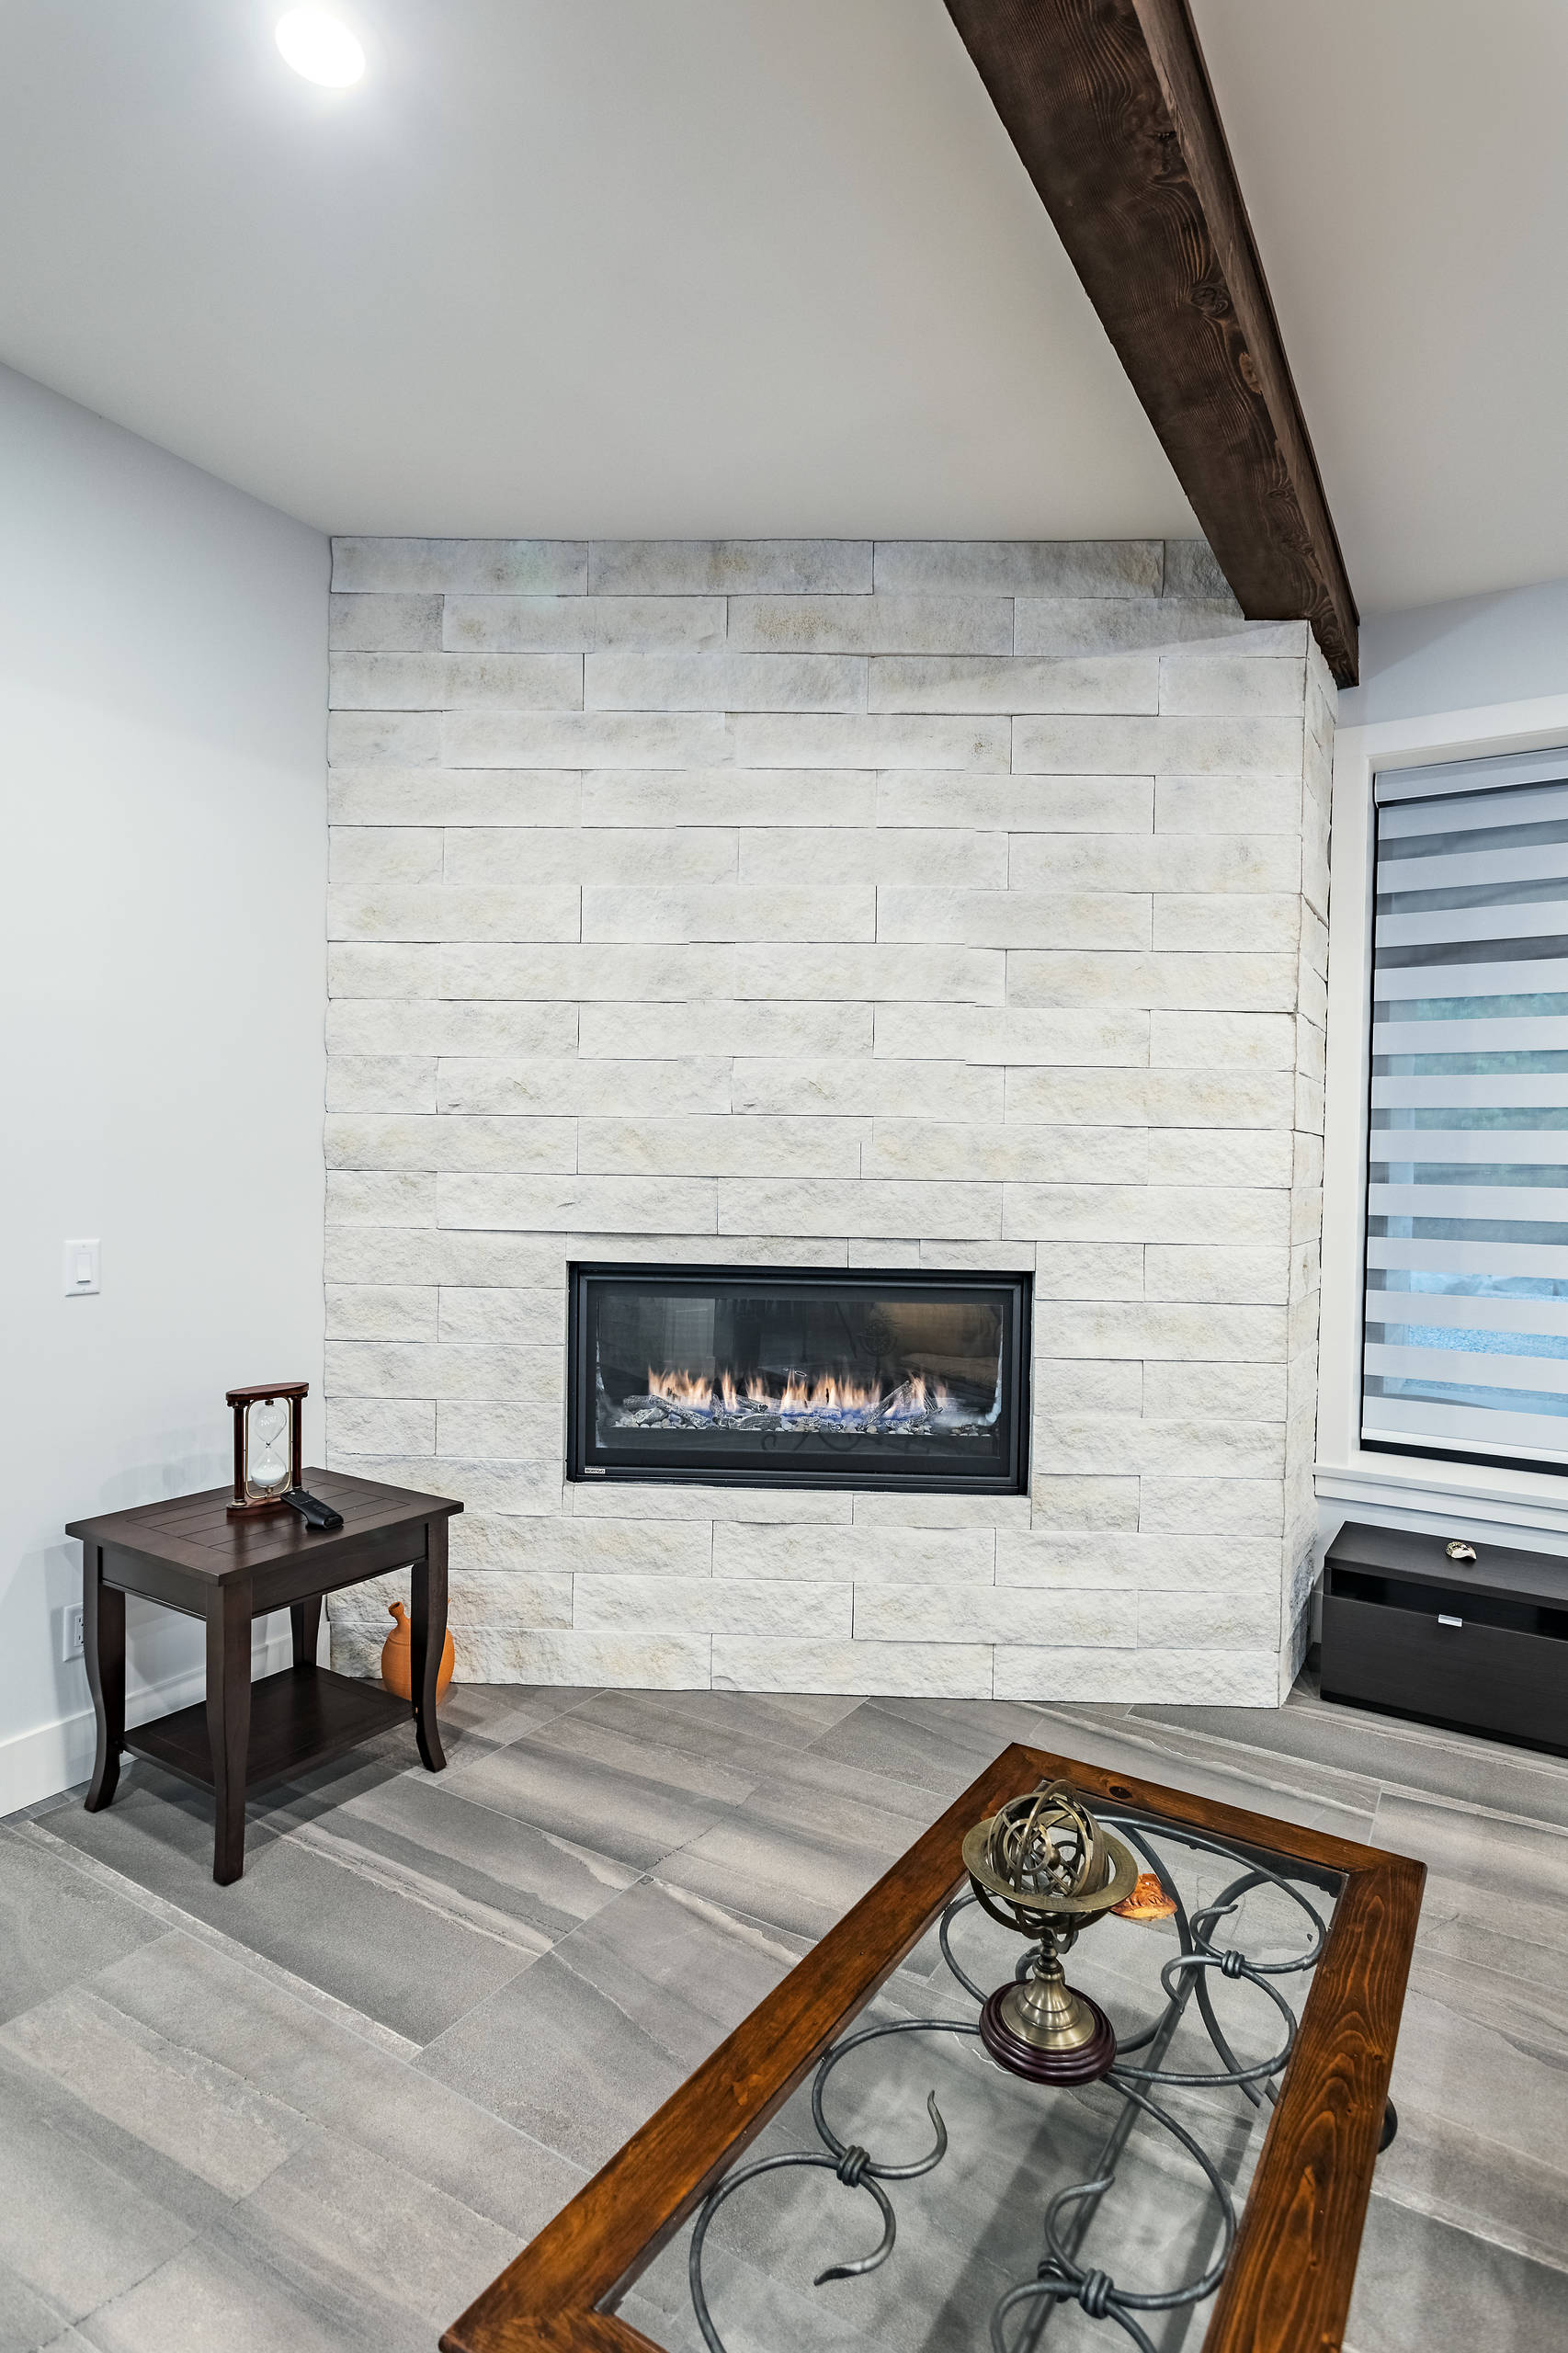 Designs-Done-Right S36 Vantage Hearth Laredo Outdoor Wood Fireplace - White Stacked Brick Liner